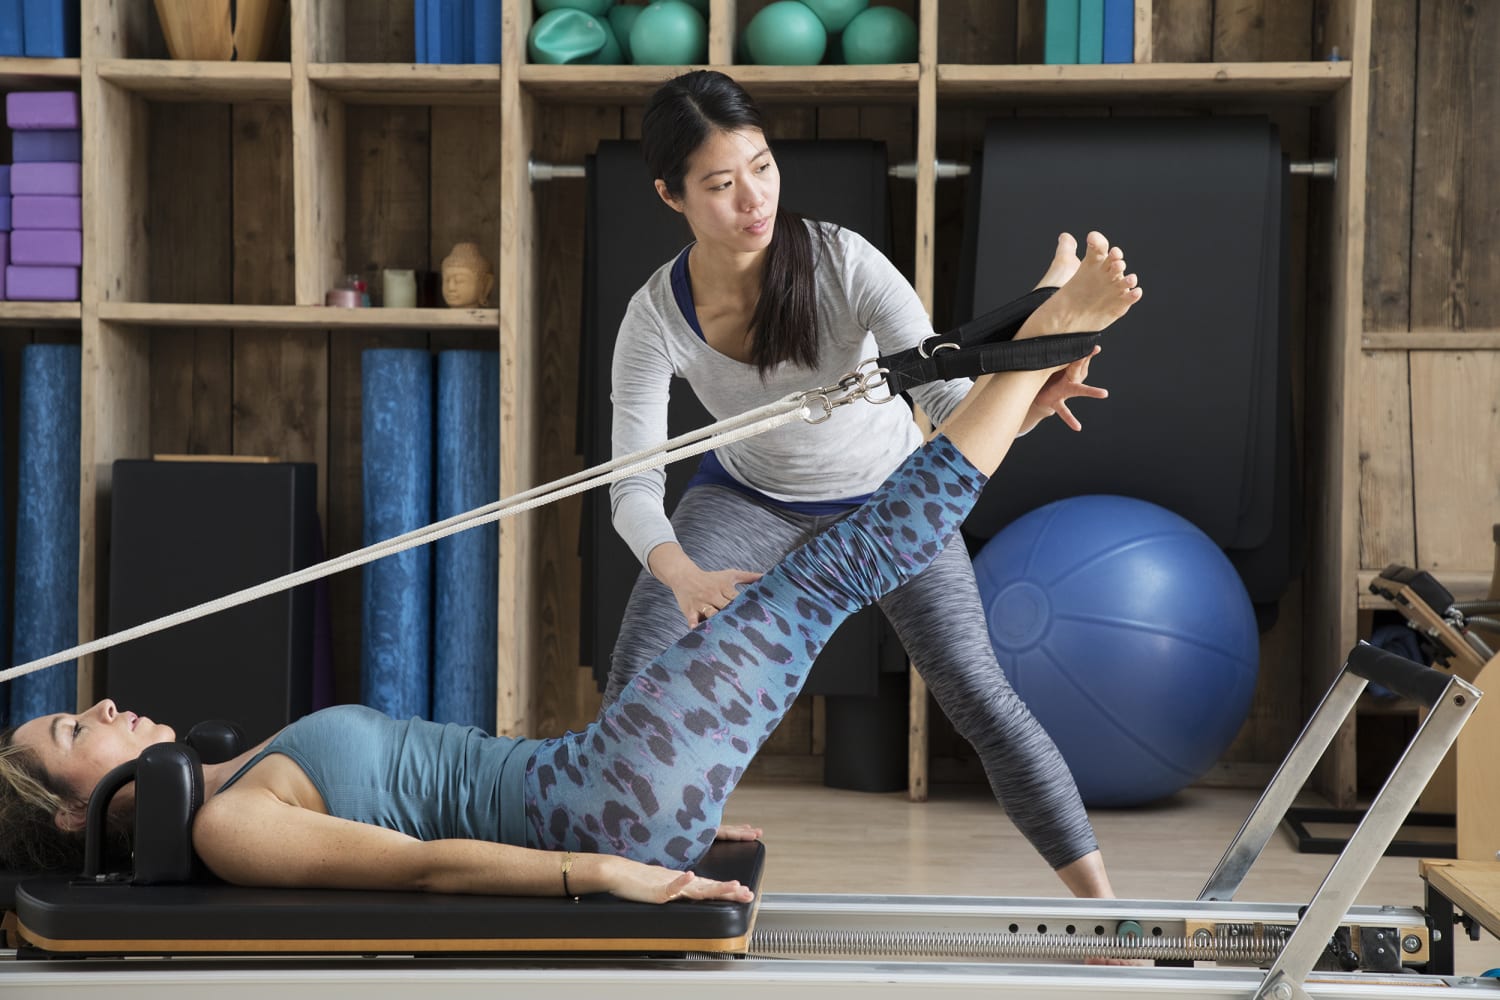 Pilates Exercise Classes Near Me Clearance, 55% OFF